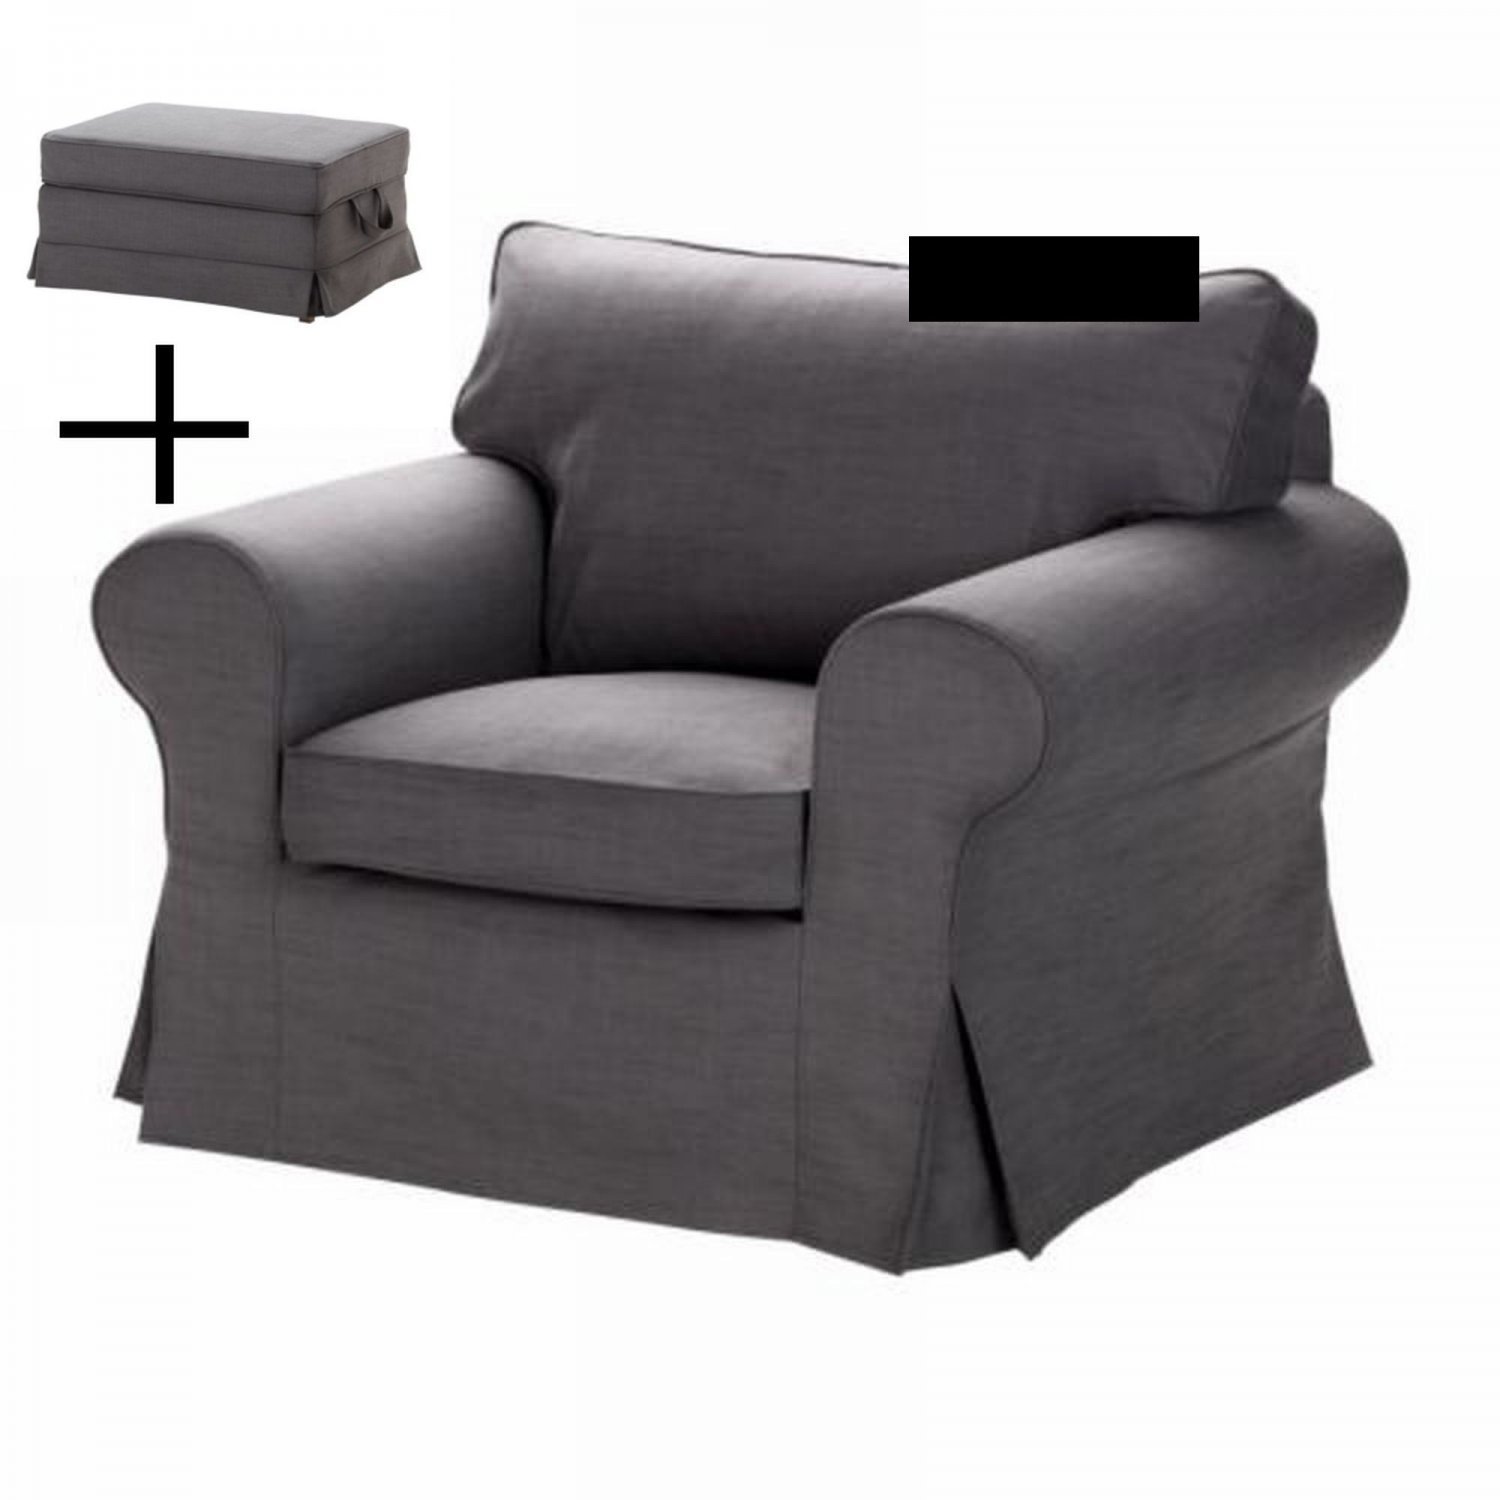 Ikea Rp Armchair And Bromma, Ikea Chair And Ottoman Covers